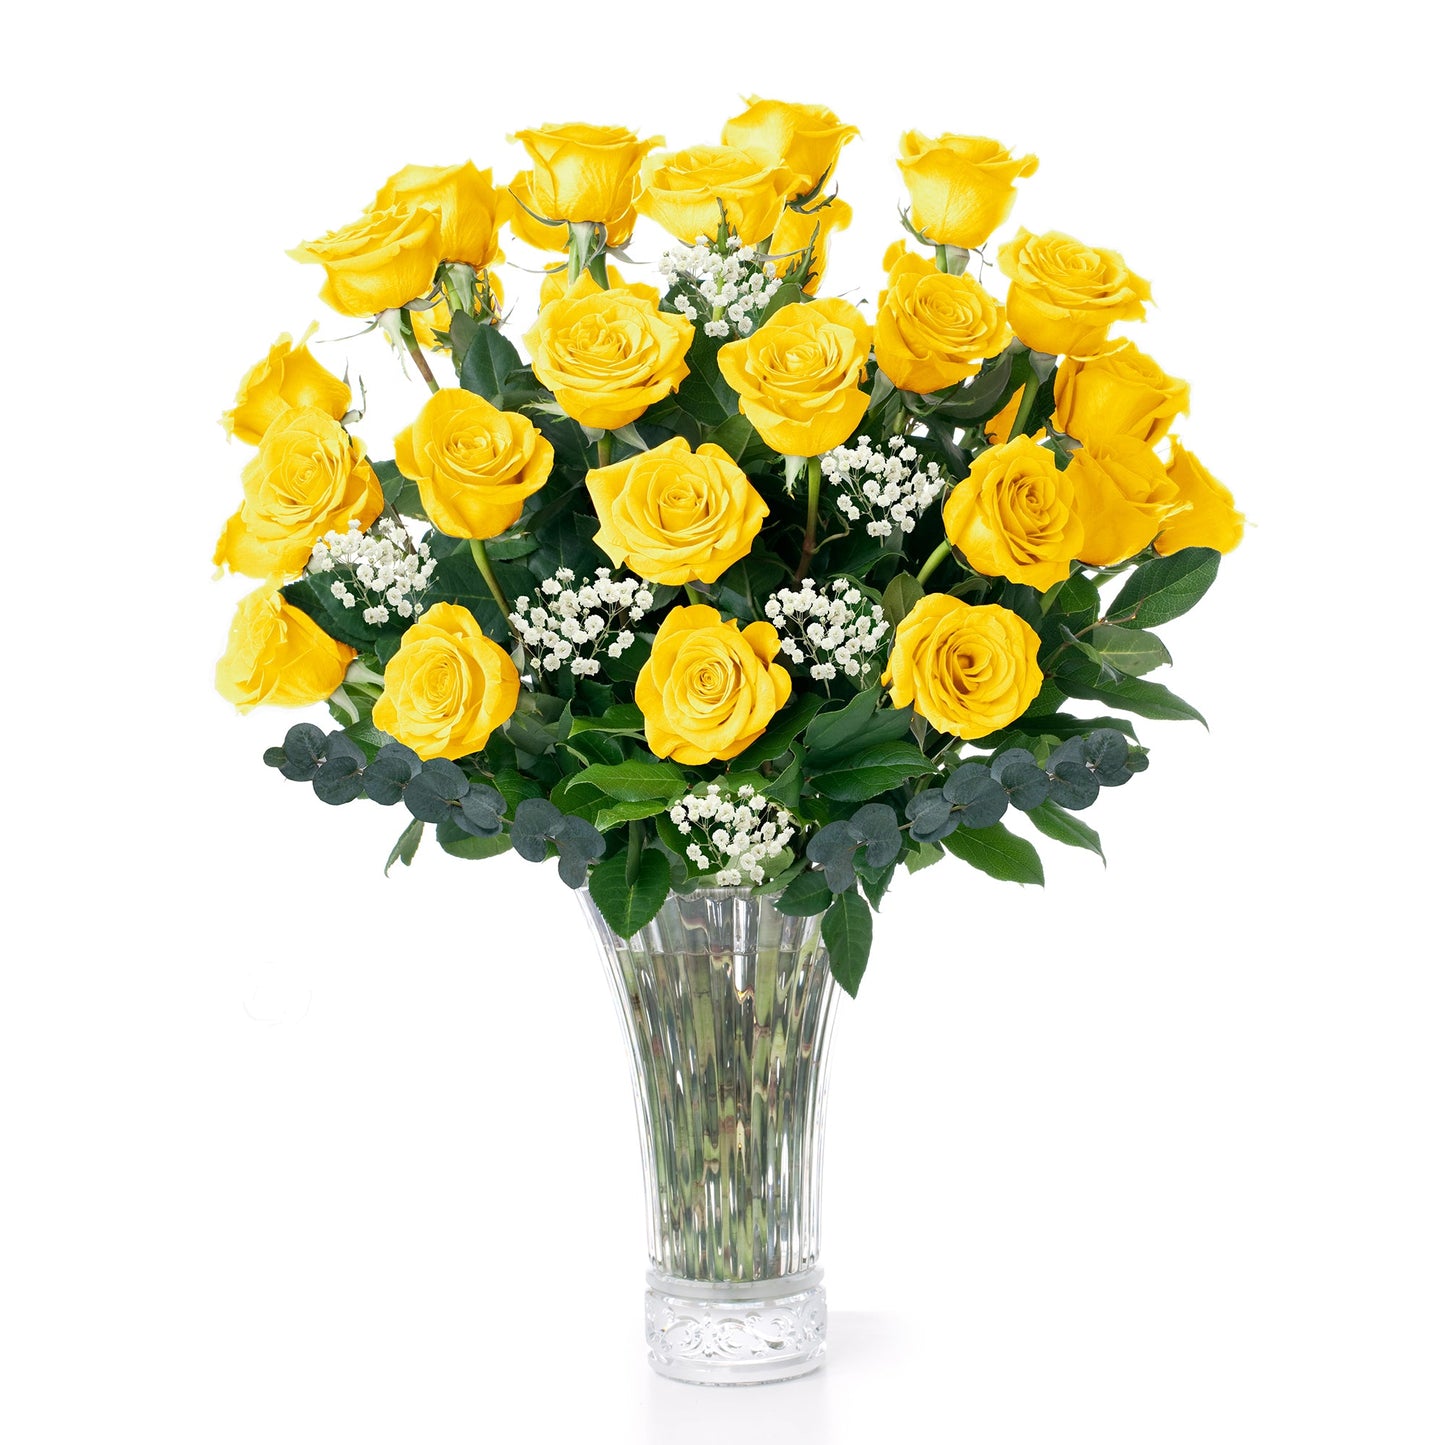 Bouquet of yellow roses